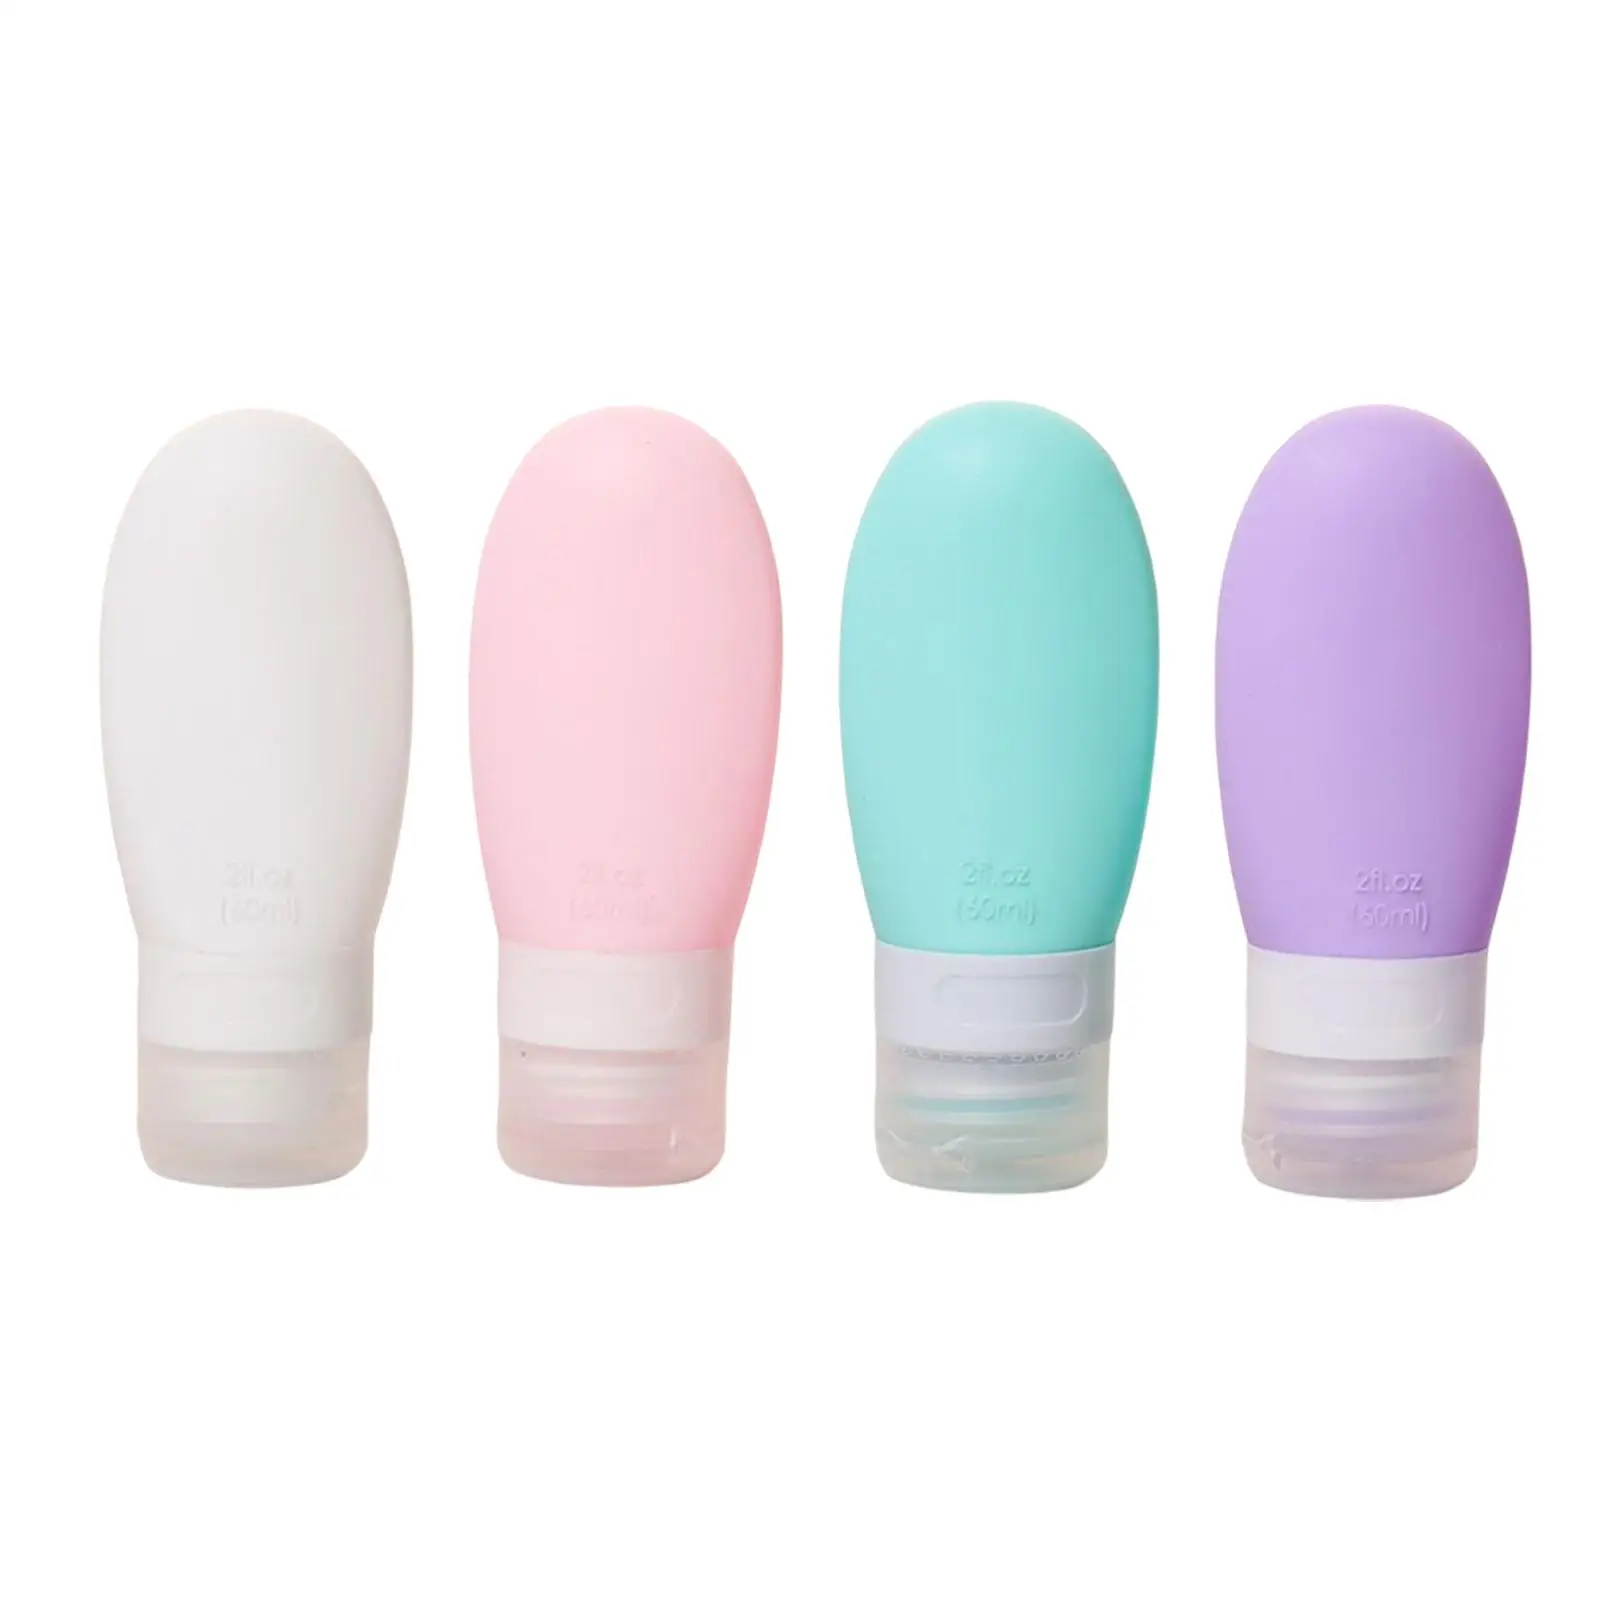 Silicone Travel Bottle Empty Refillable Traveling Size Liquid Container for Toiletries Conditioner Lotion Shampoo Body Wash